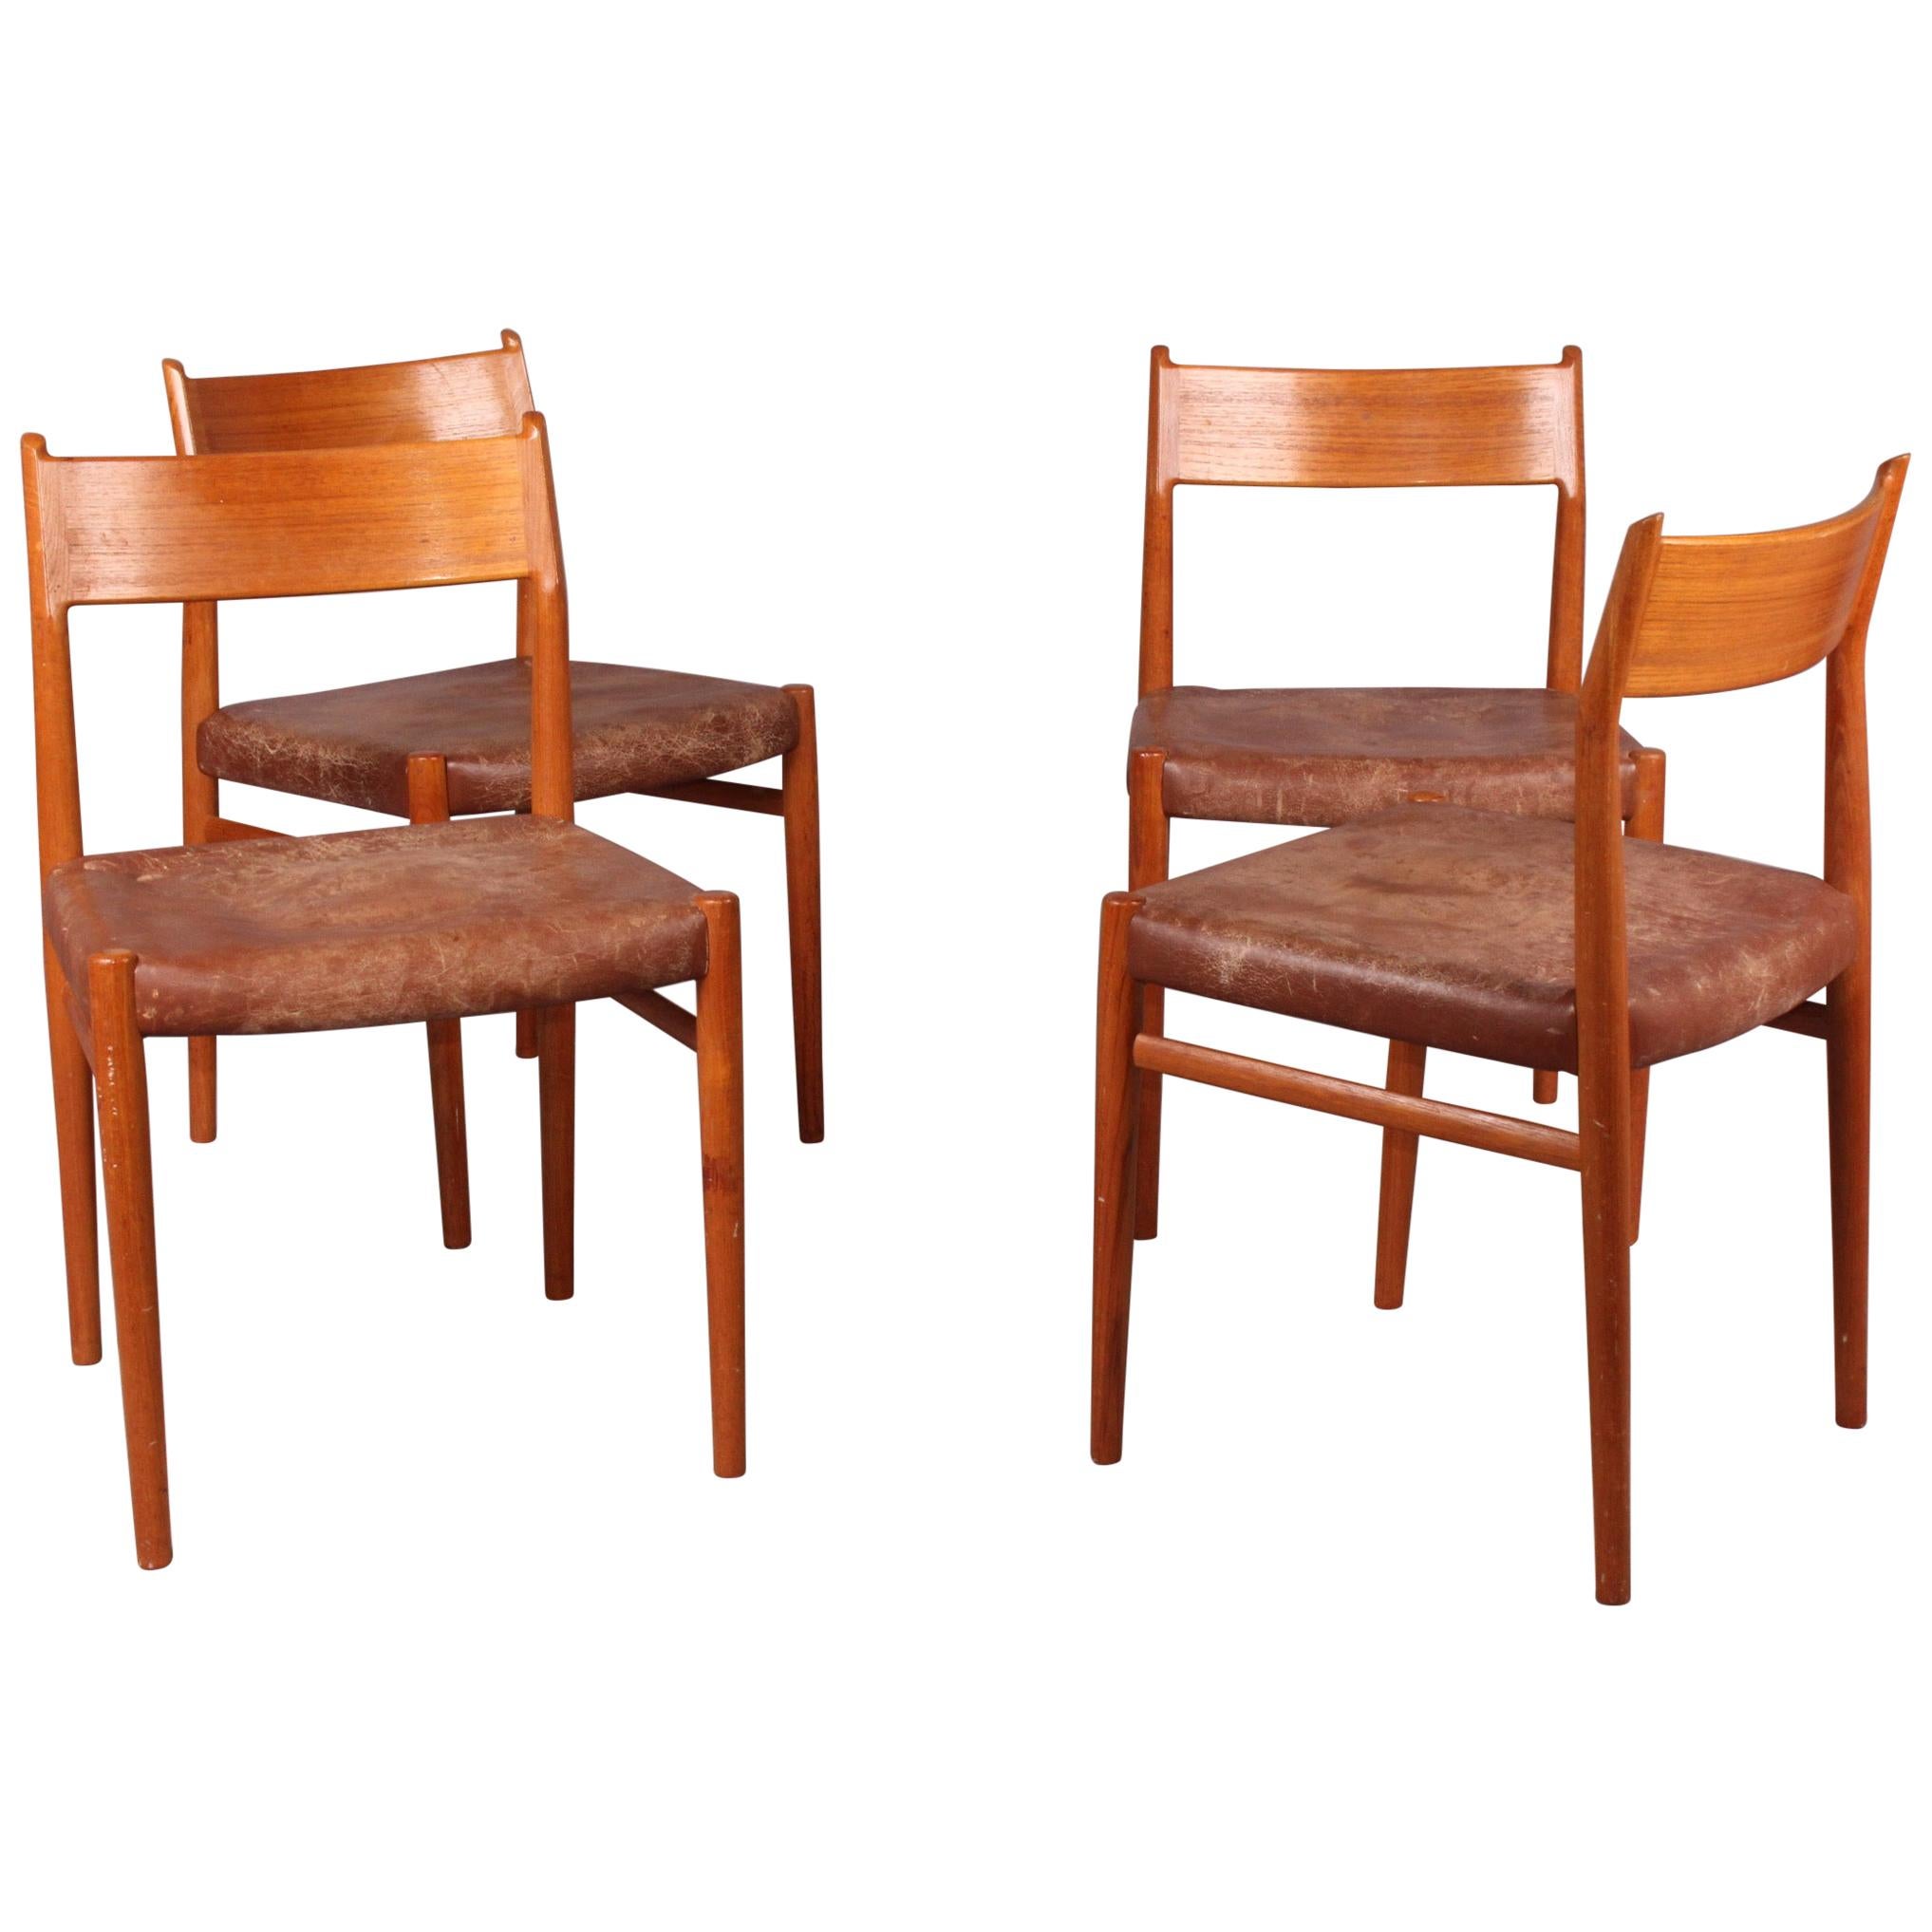 Set of Four Nordic Chairs